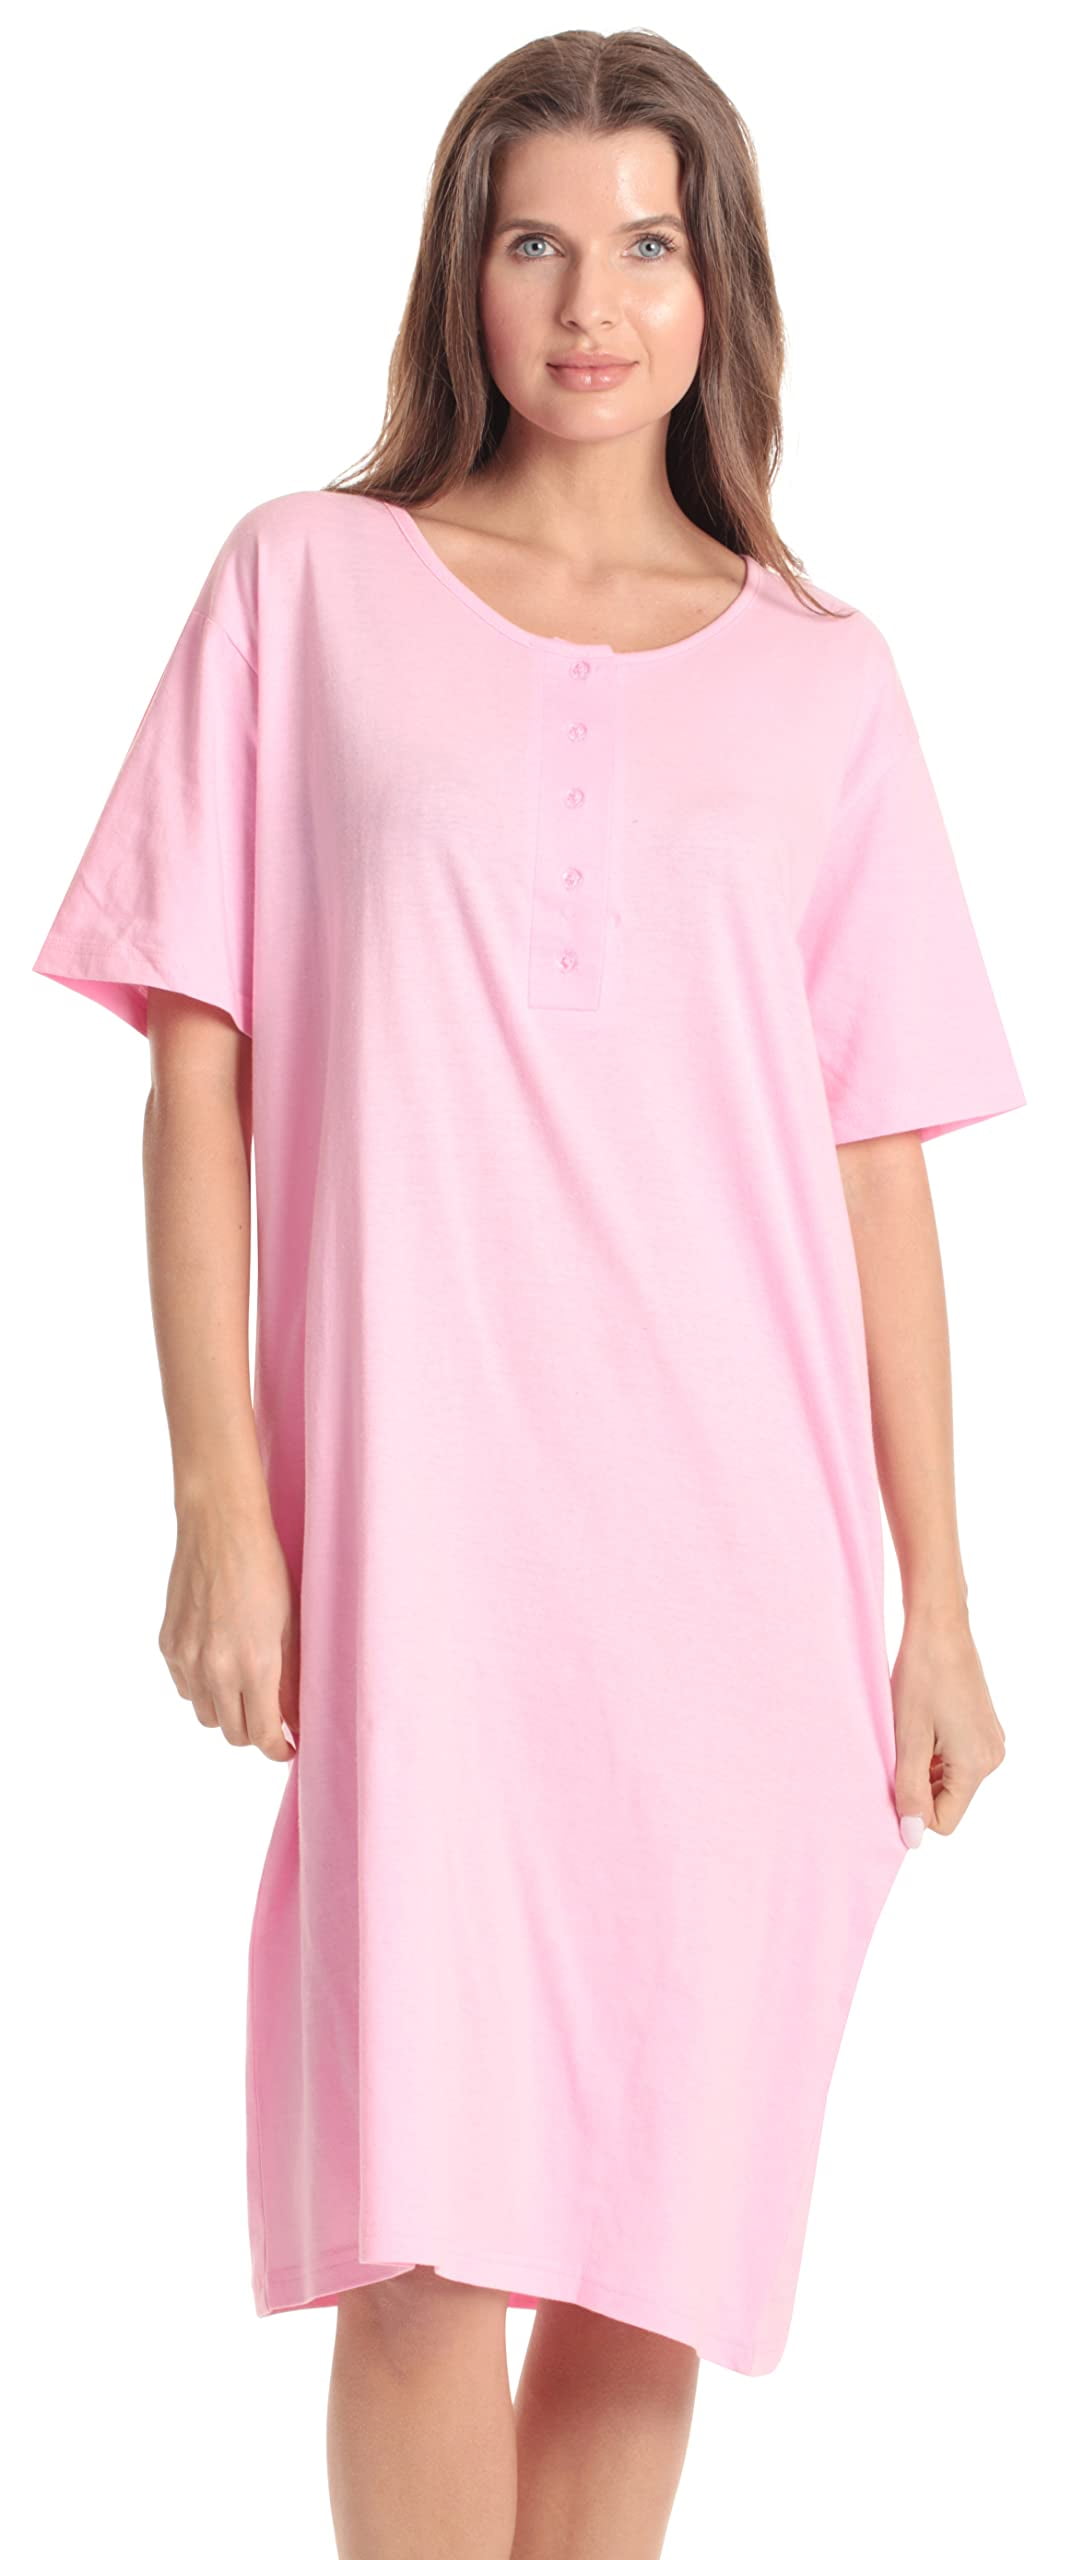 Just Love Short Sleeve Nightgown / Night Shirts Sleep Dress for Women  (Solid Pink, 2X Plus)